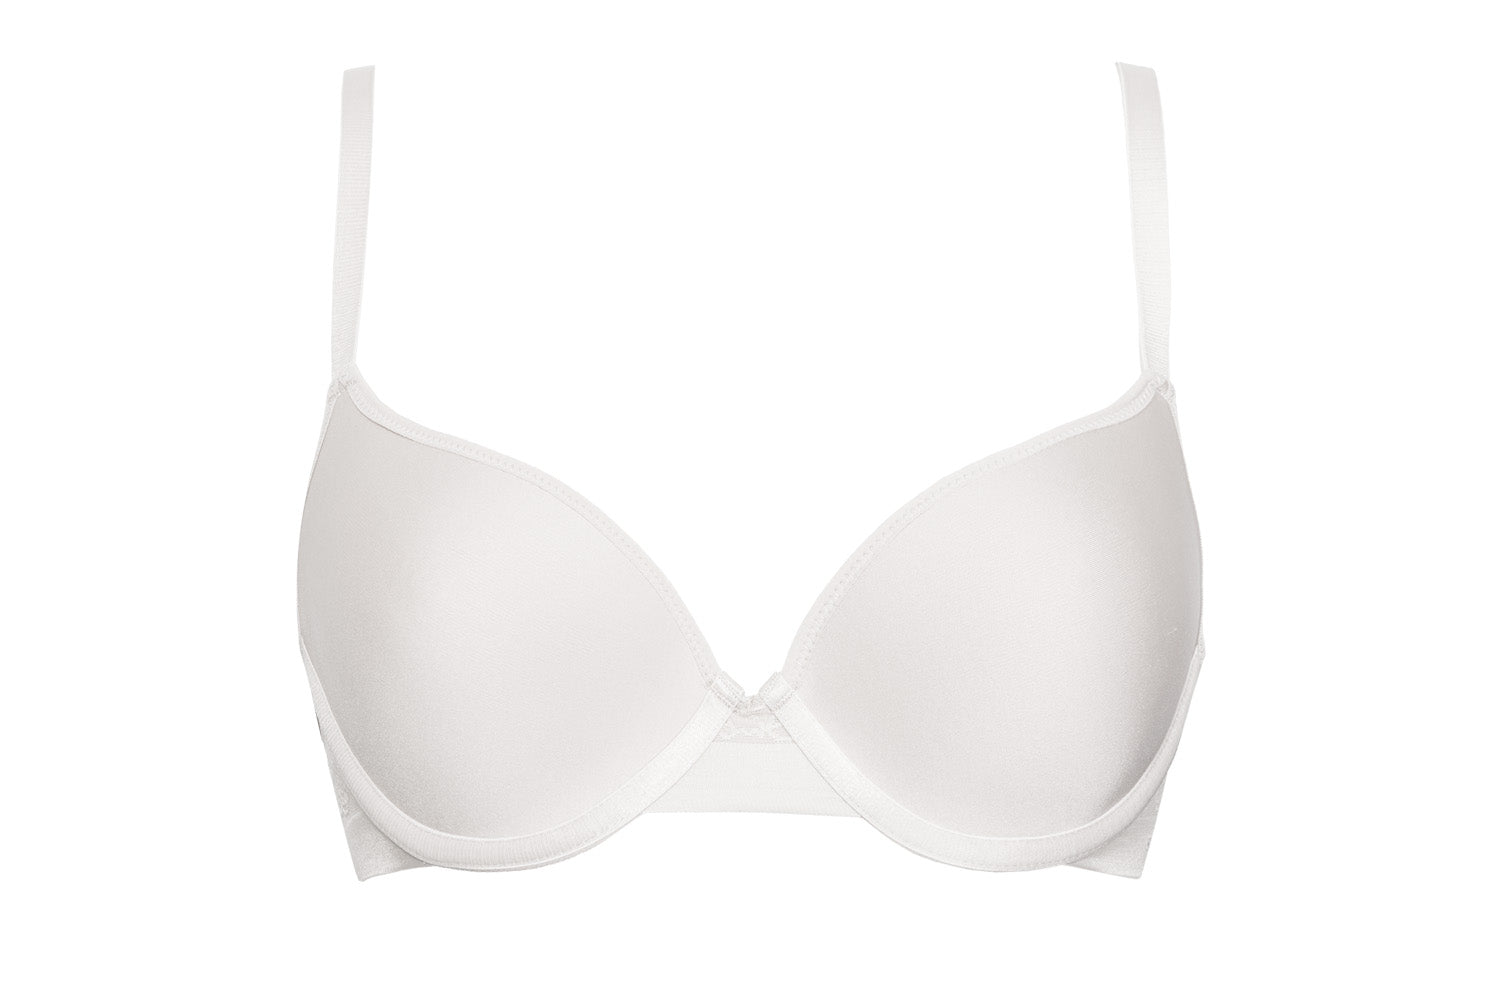 This underwire spacer cup bra from SIéLEI Italy's Flower line ensures optimal support and comfort.